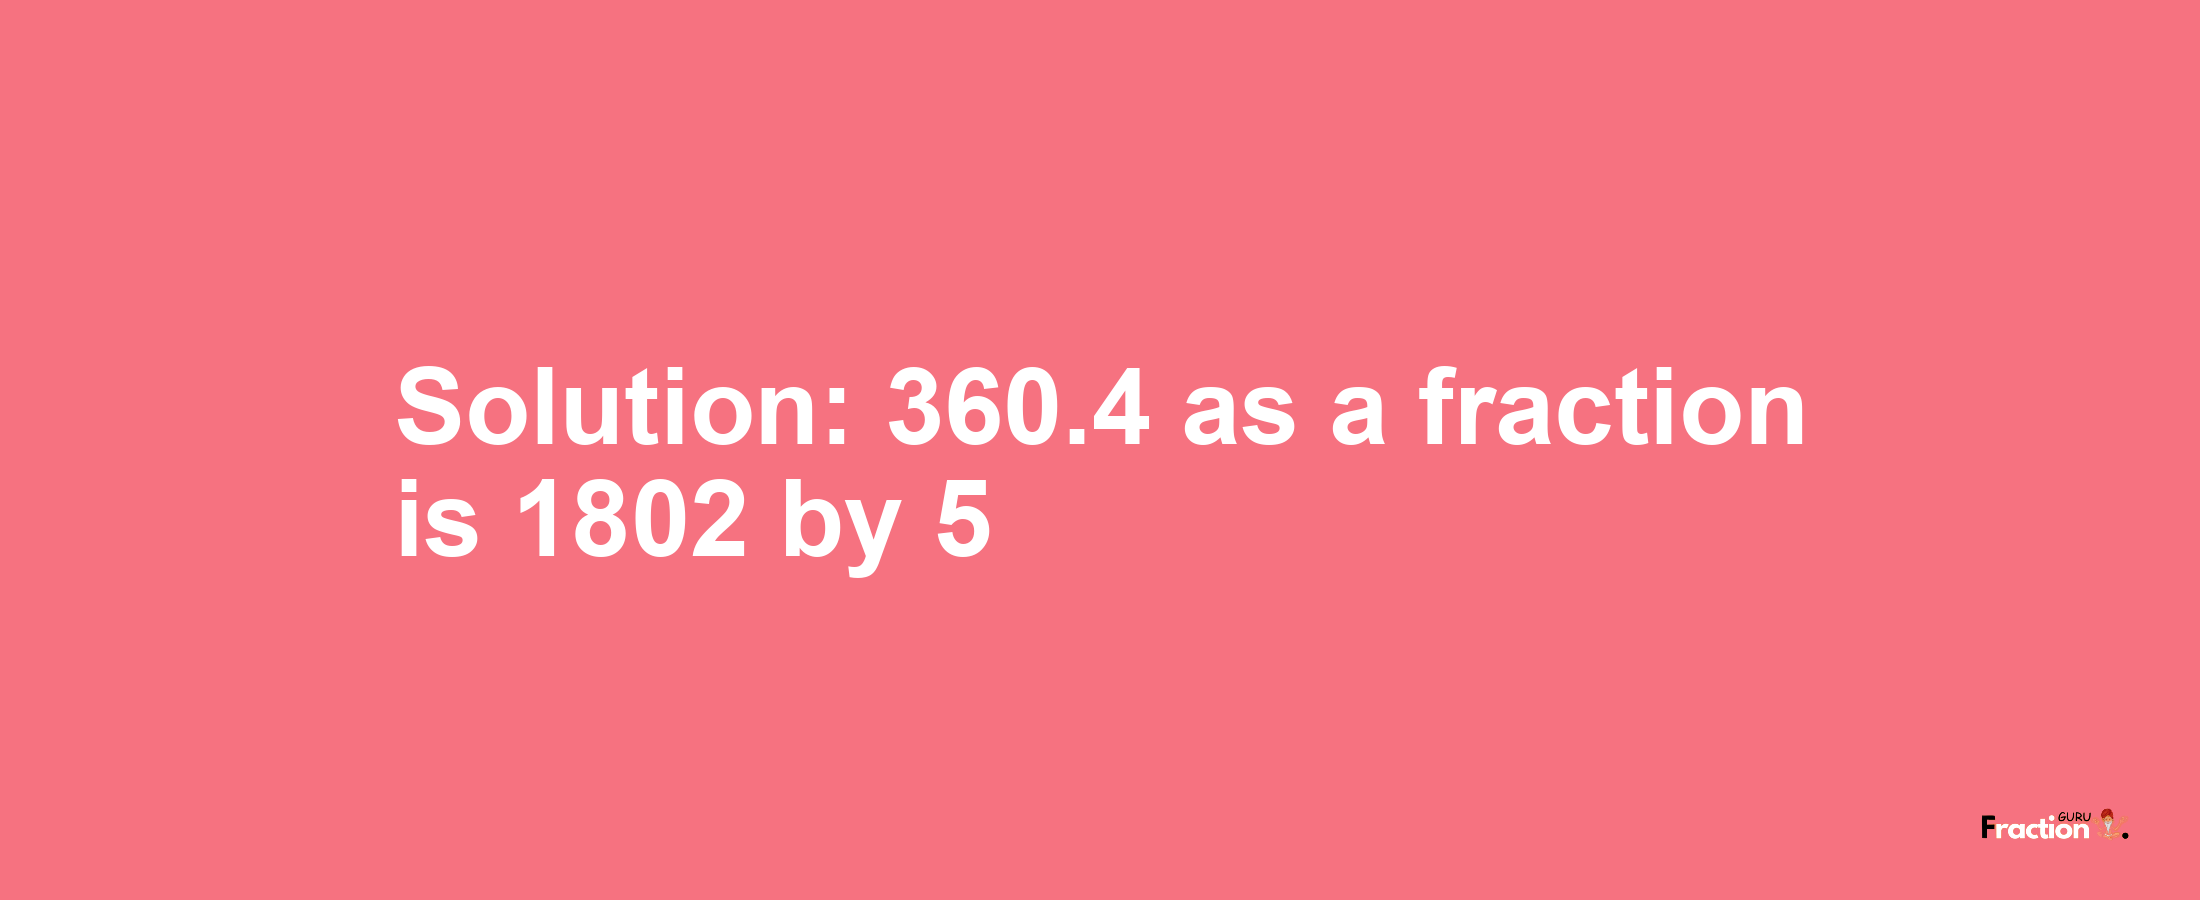 Solution:360.4 as a fraction is 1802/5